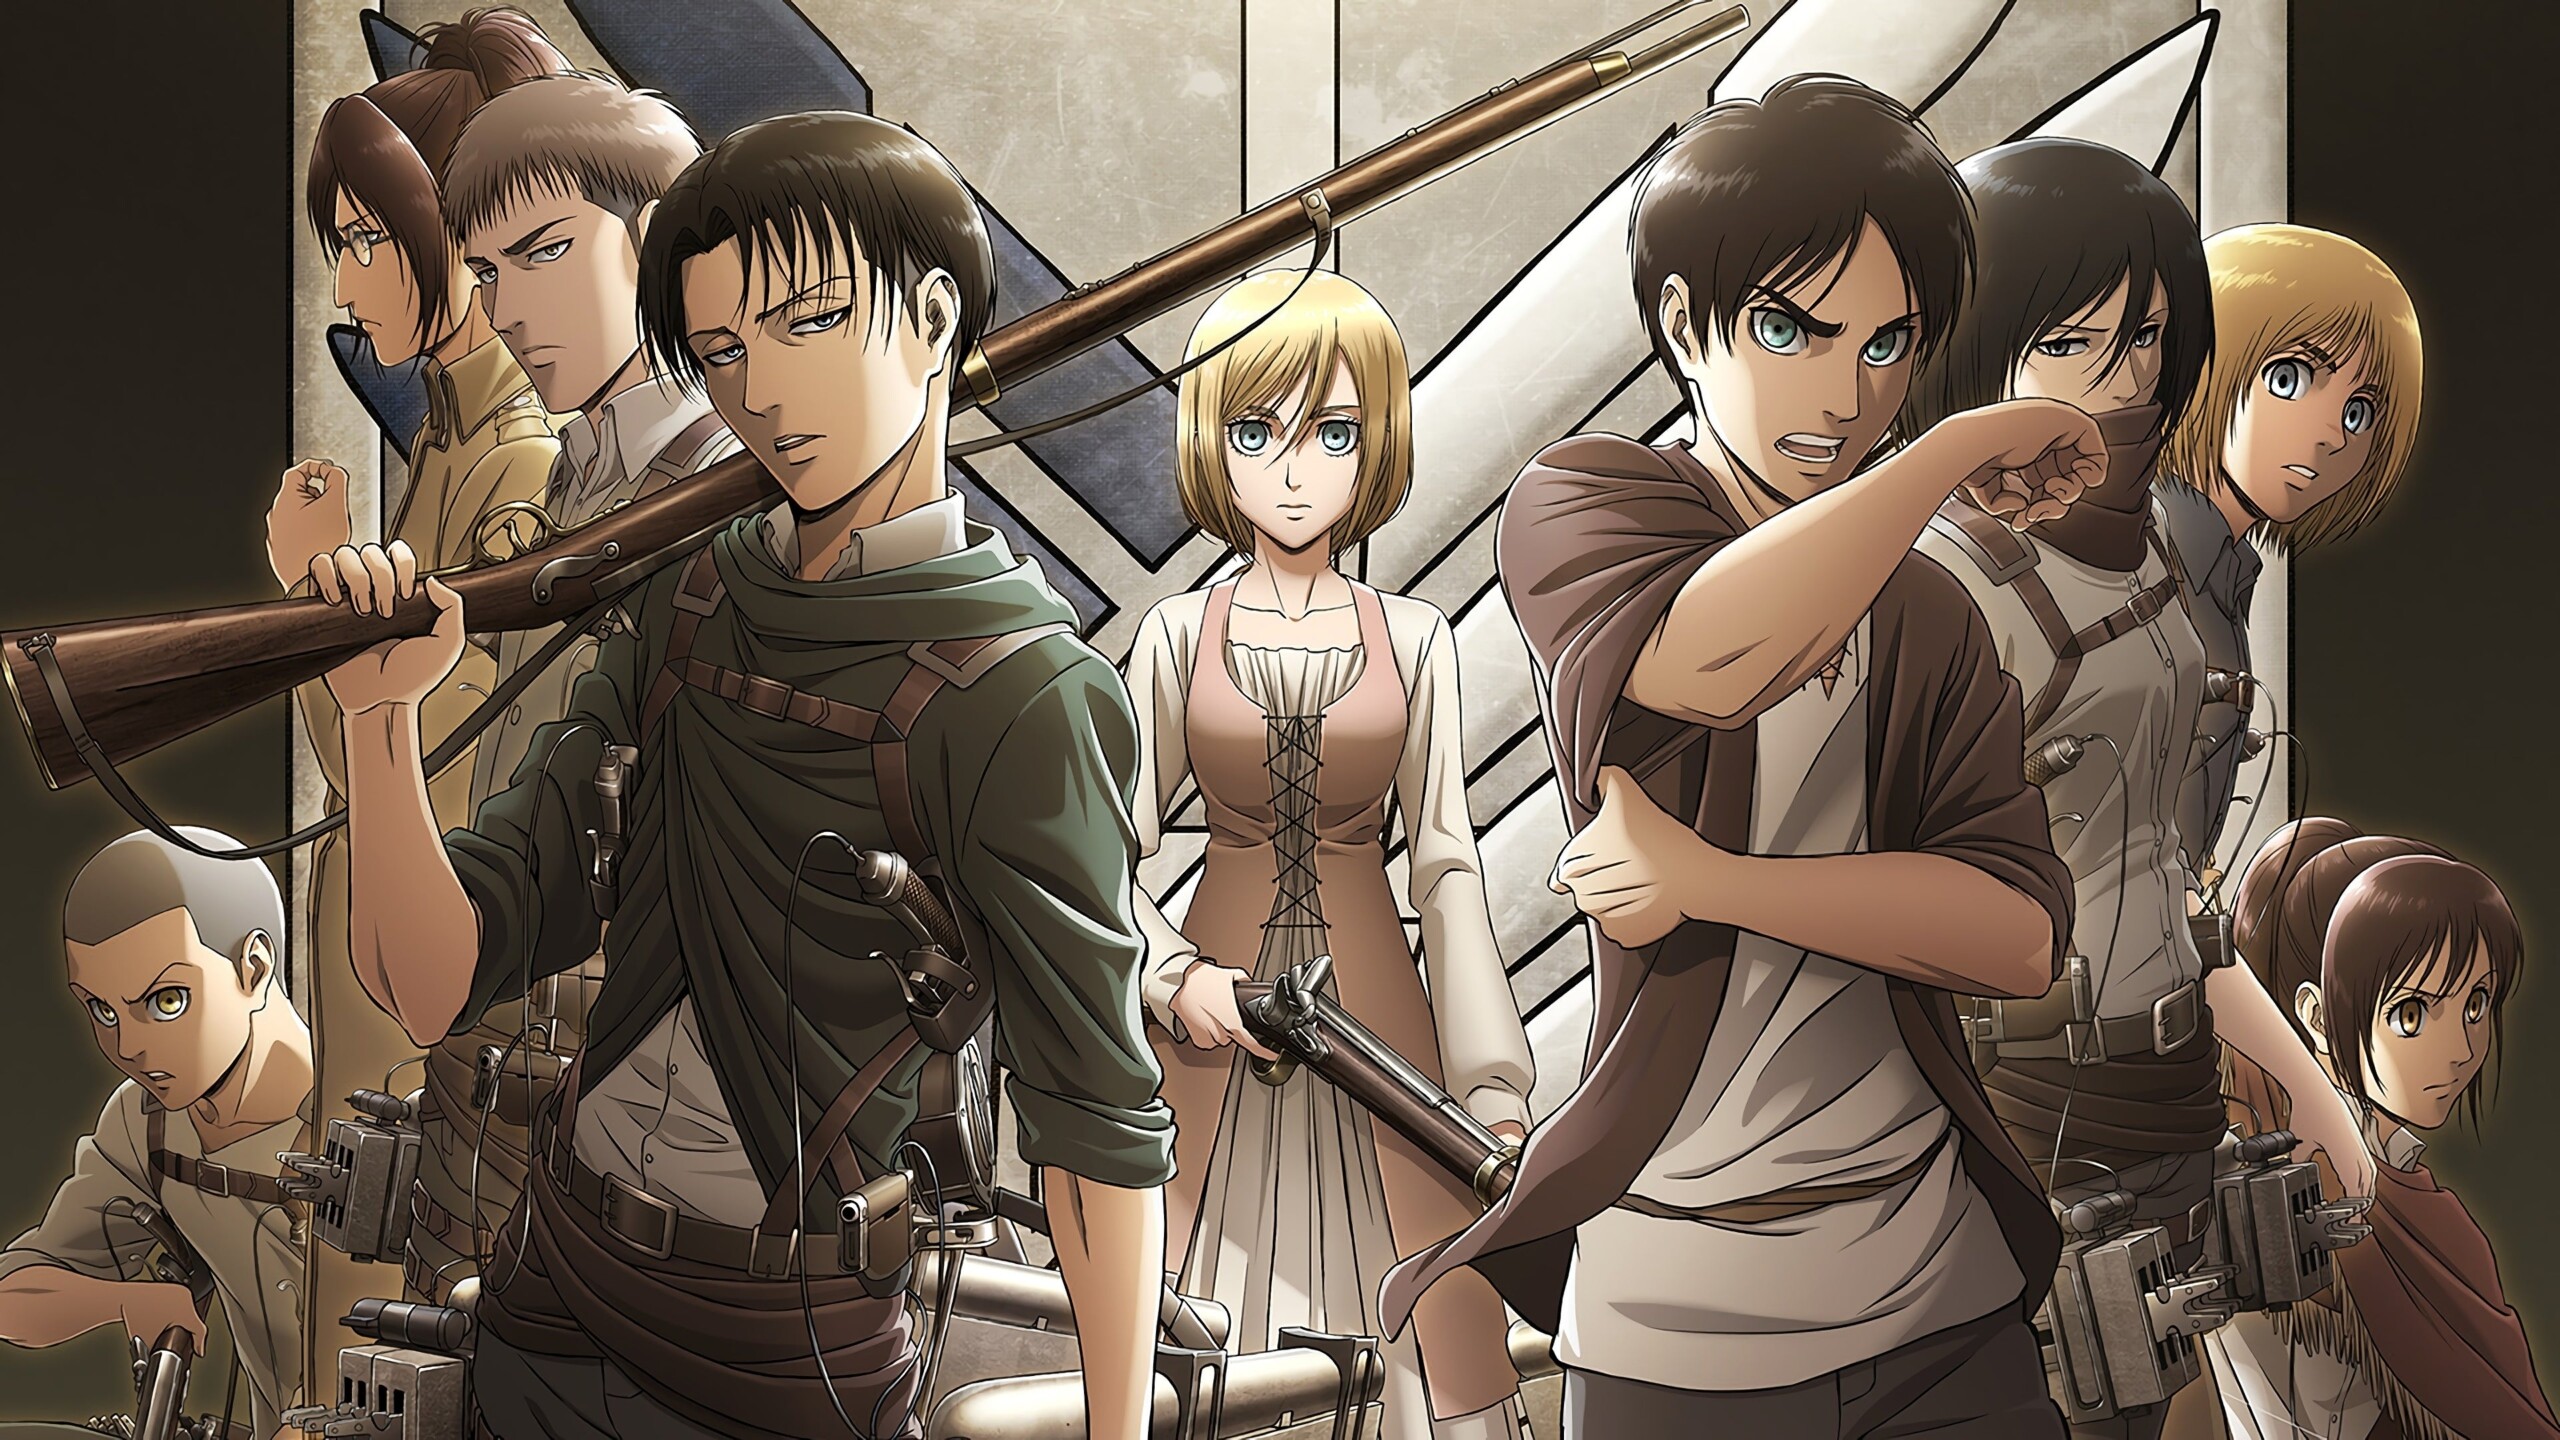 Attack on Titan: The Final Season: "The Other Side of the Sea", War against the Mid-East Allied Forces. 2560x1440 HD Wallpaper.